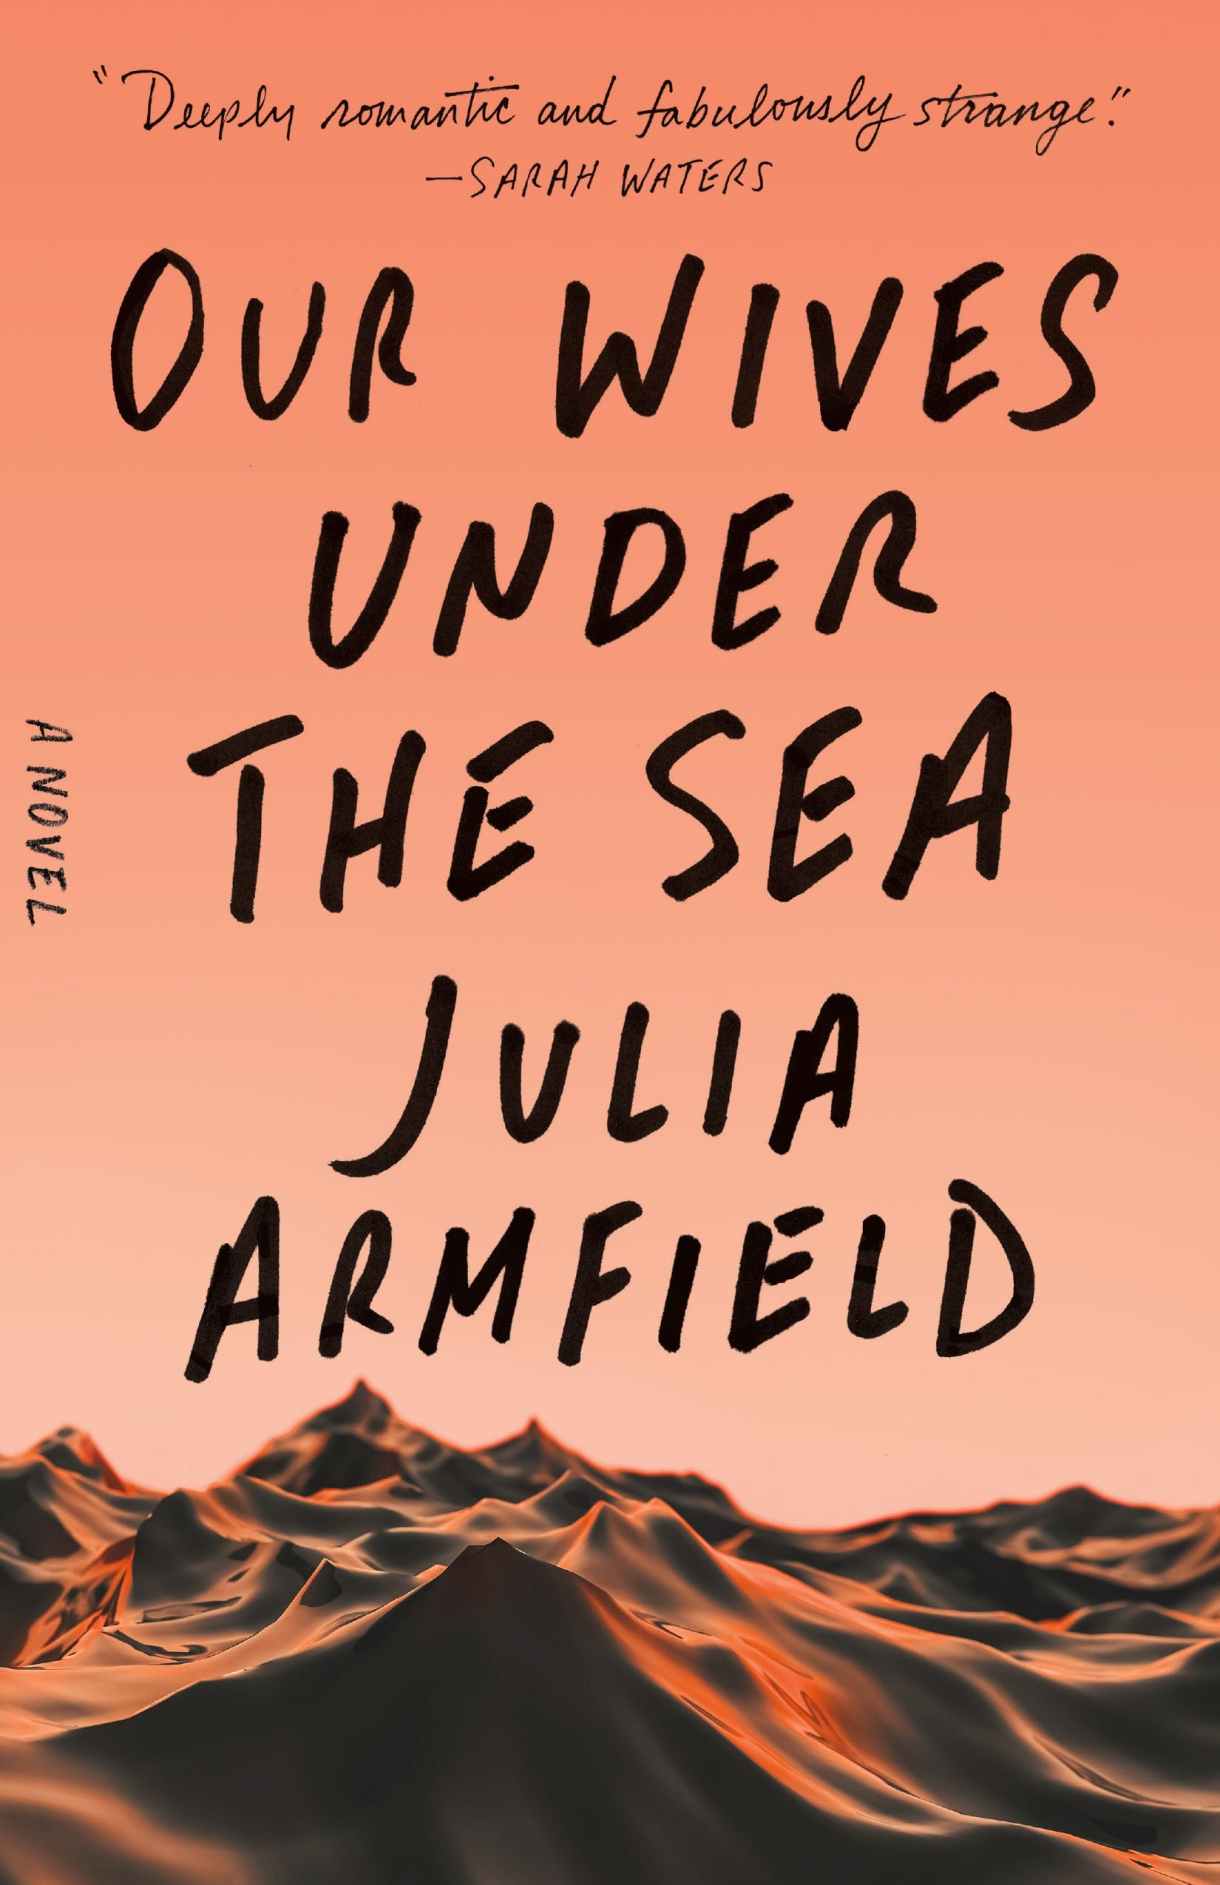 The cover of "Our Wives Under the Sea" featuring rose-colored waves of water and a sunset sky.